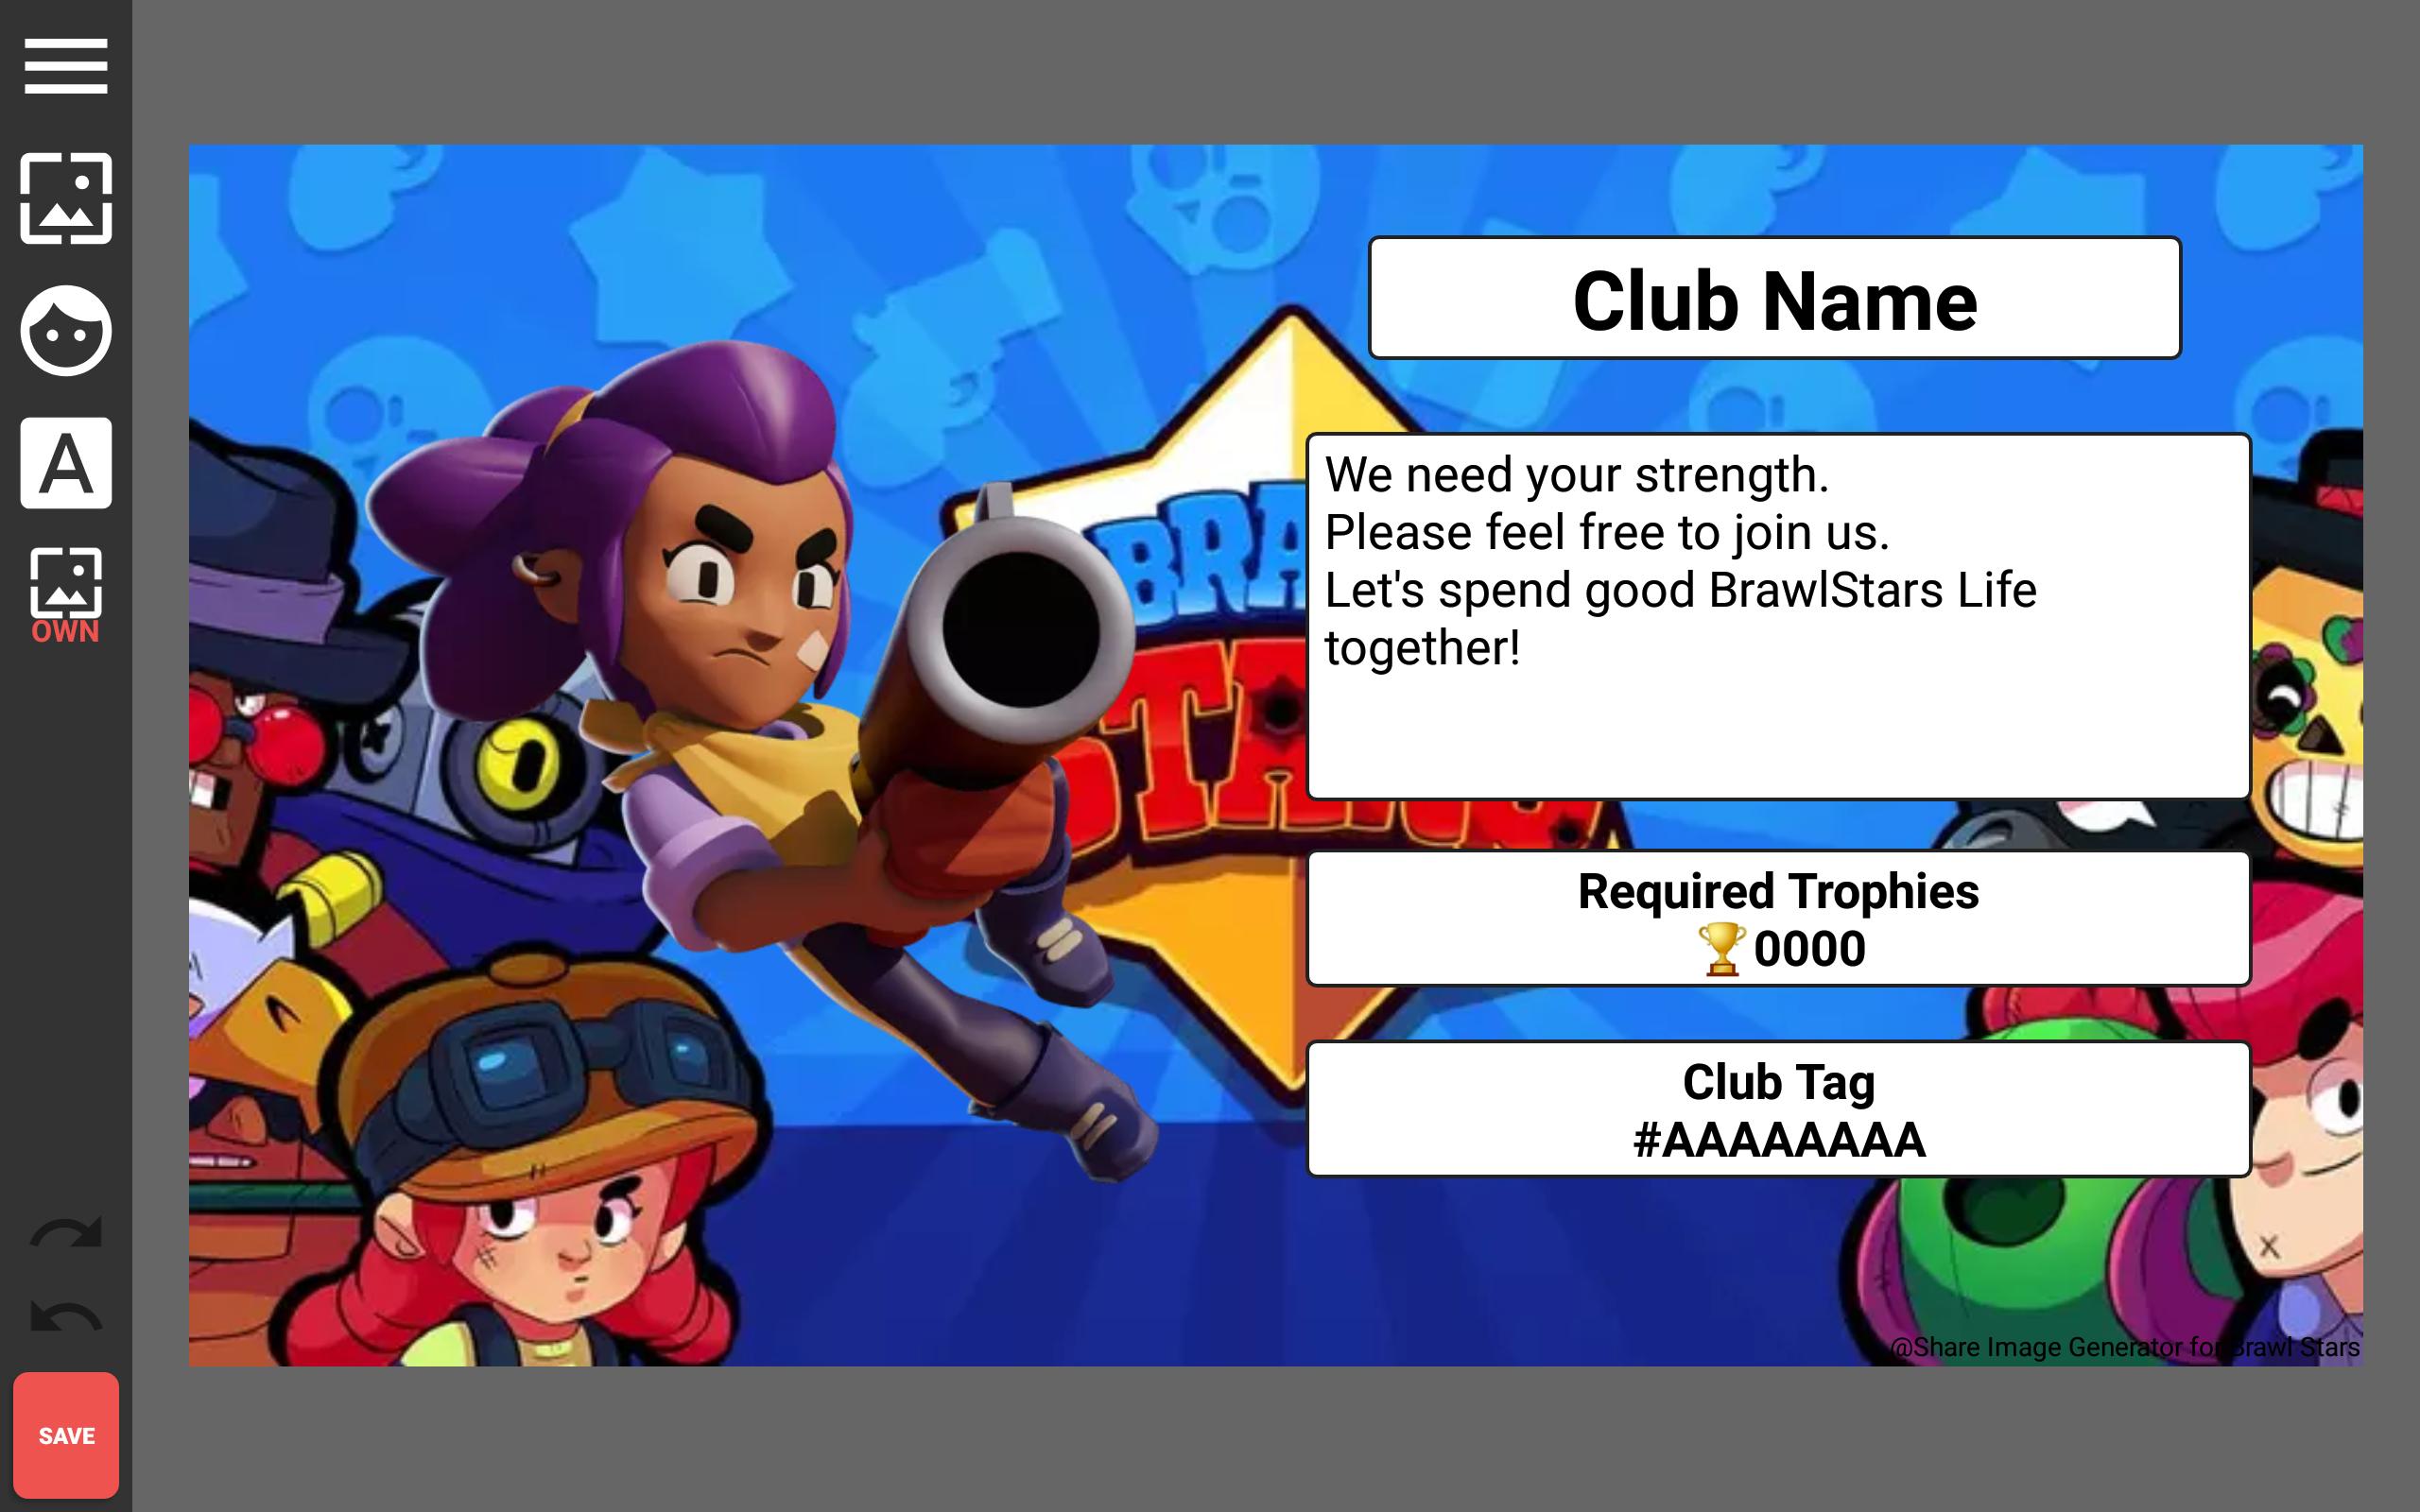 Share Image Generator For Brawl Stars For Android Apk Download